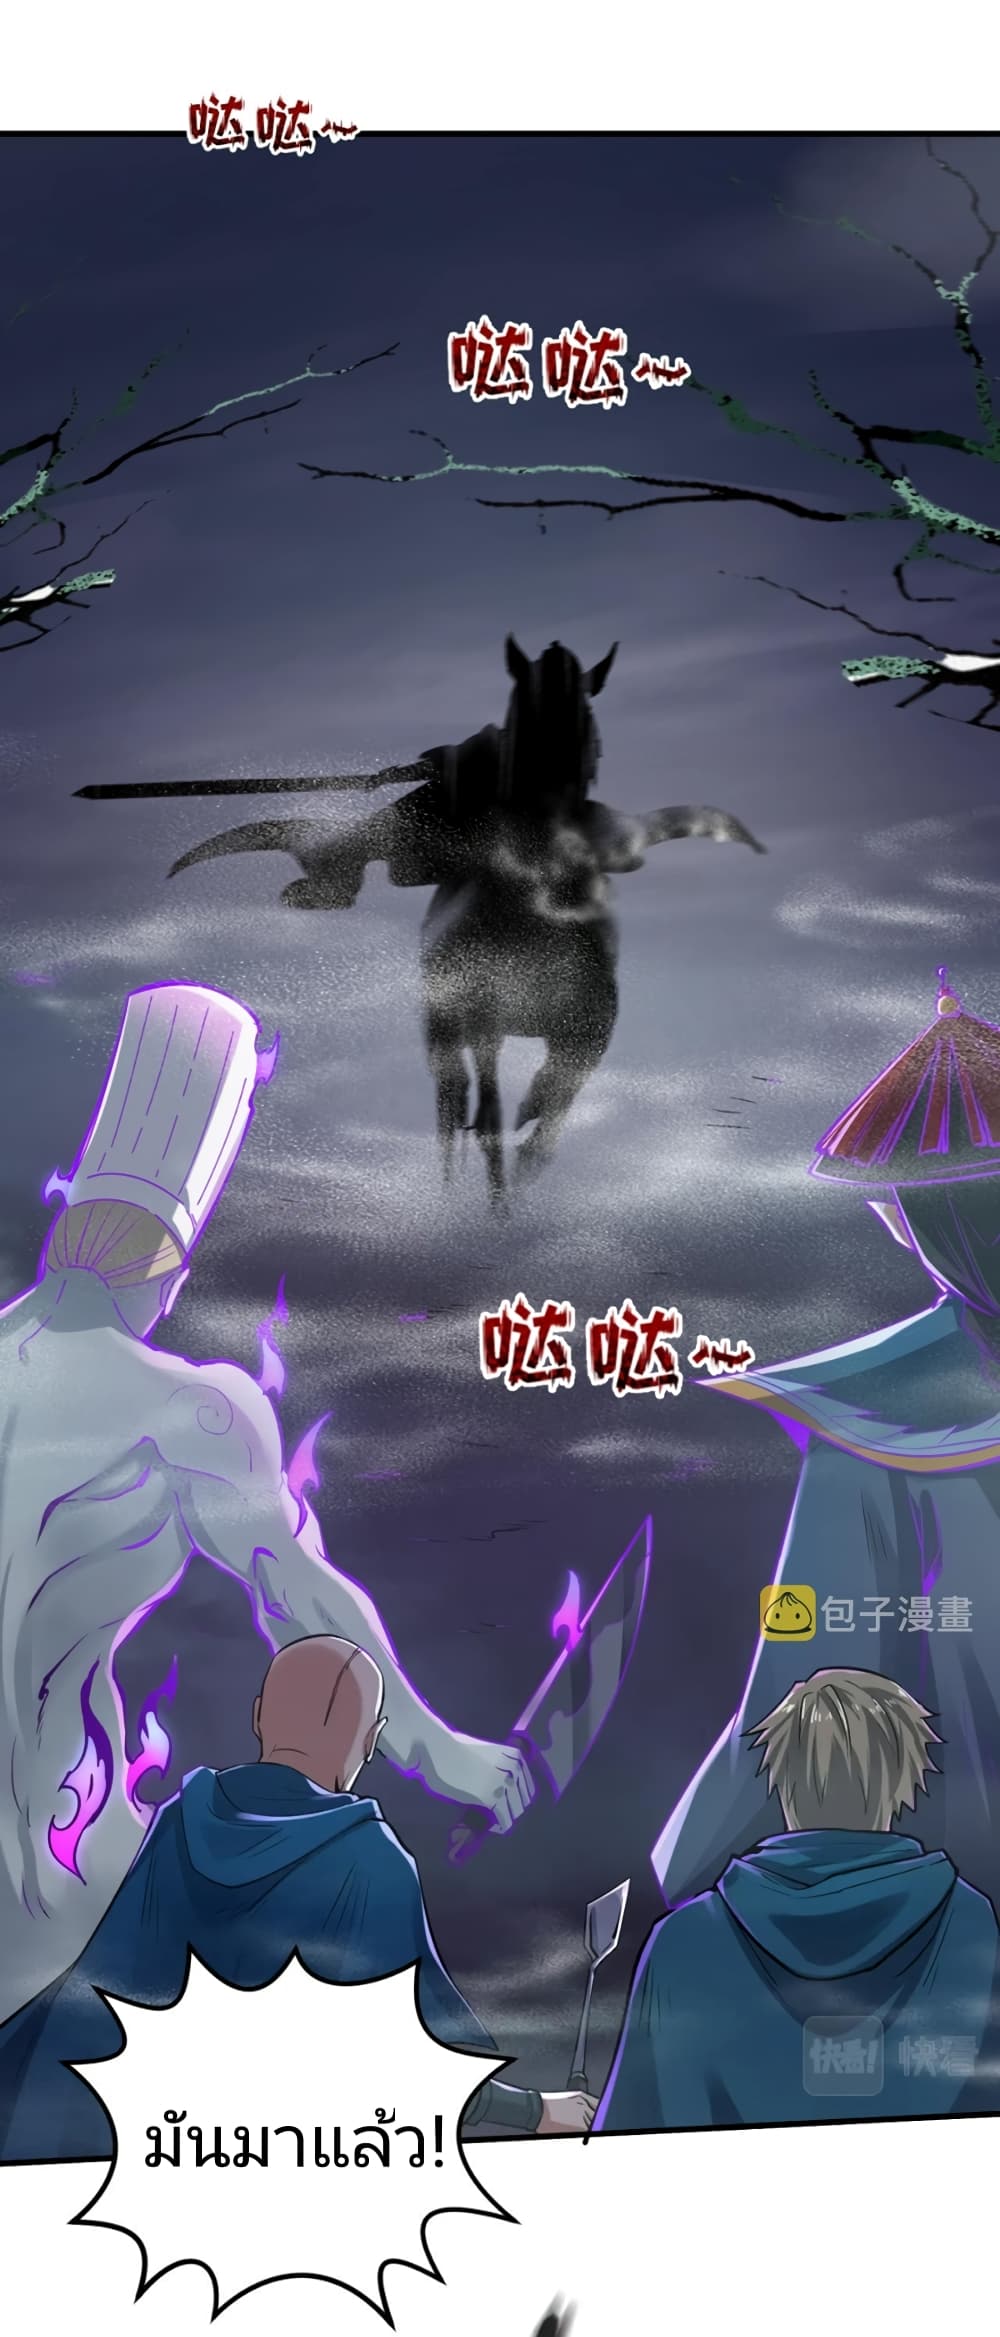 The Age of Ghost Spirits à¸à¸­à¸à¸à¸µà¹ 20 (29)